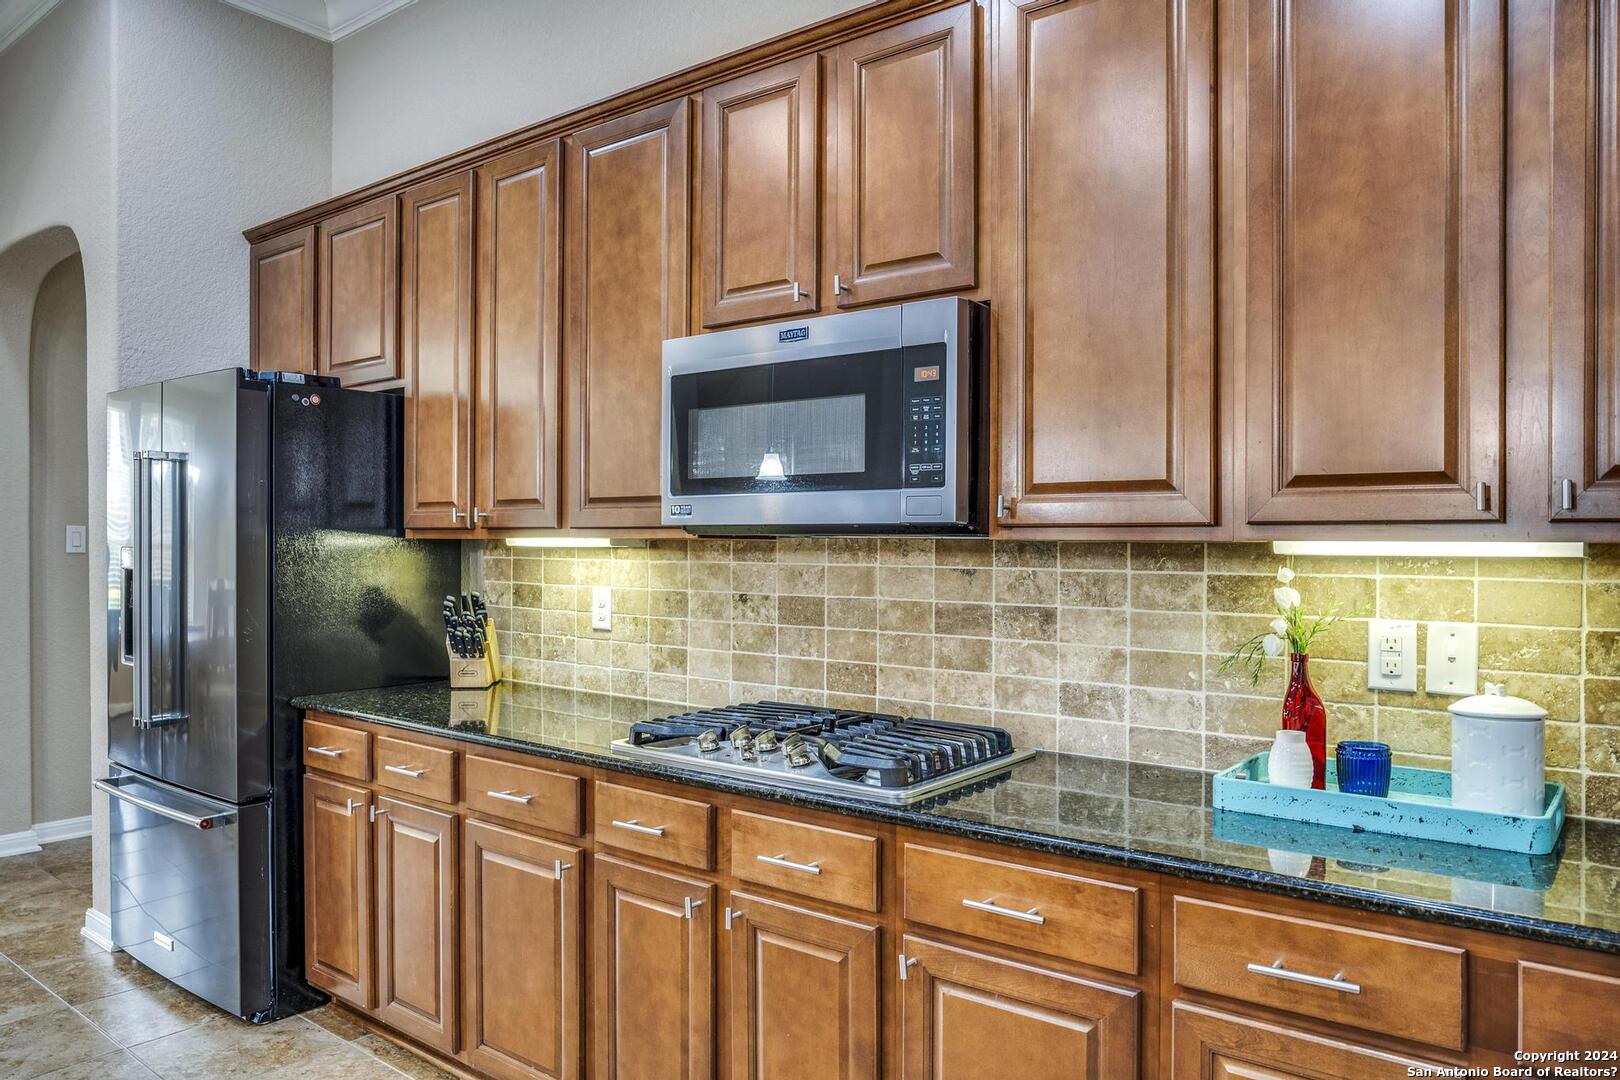 If you have additional questions regarding 29006 Gooseberry  in San Antonio or would like to tour the property with us call 800-660-1022 and reference MLS# 1750276.